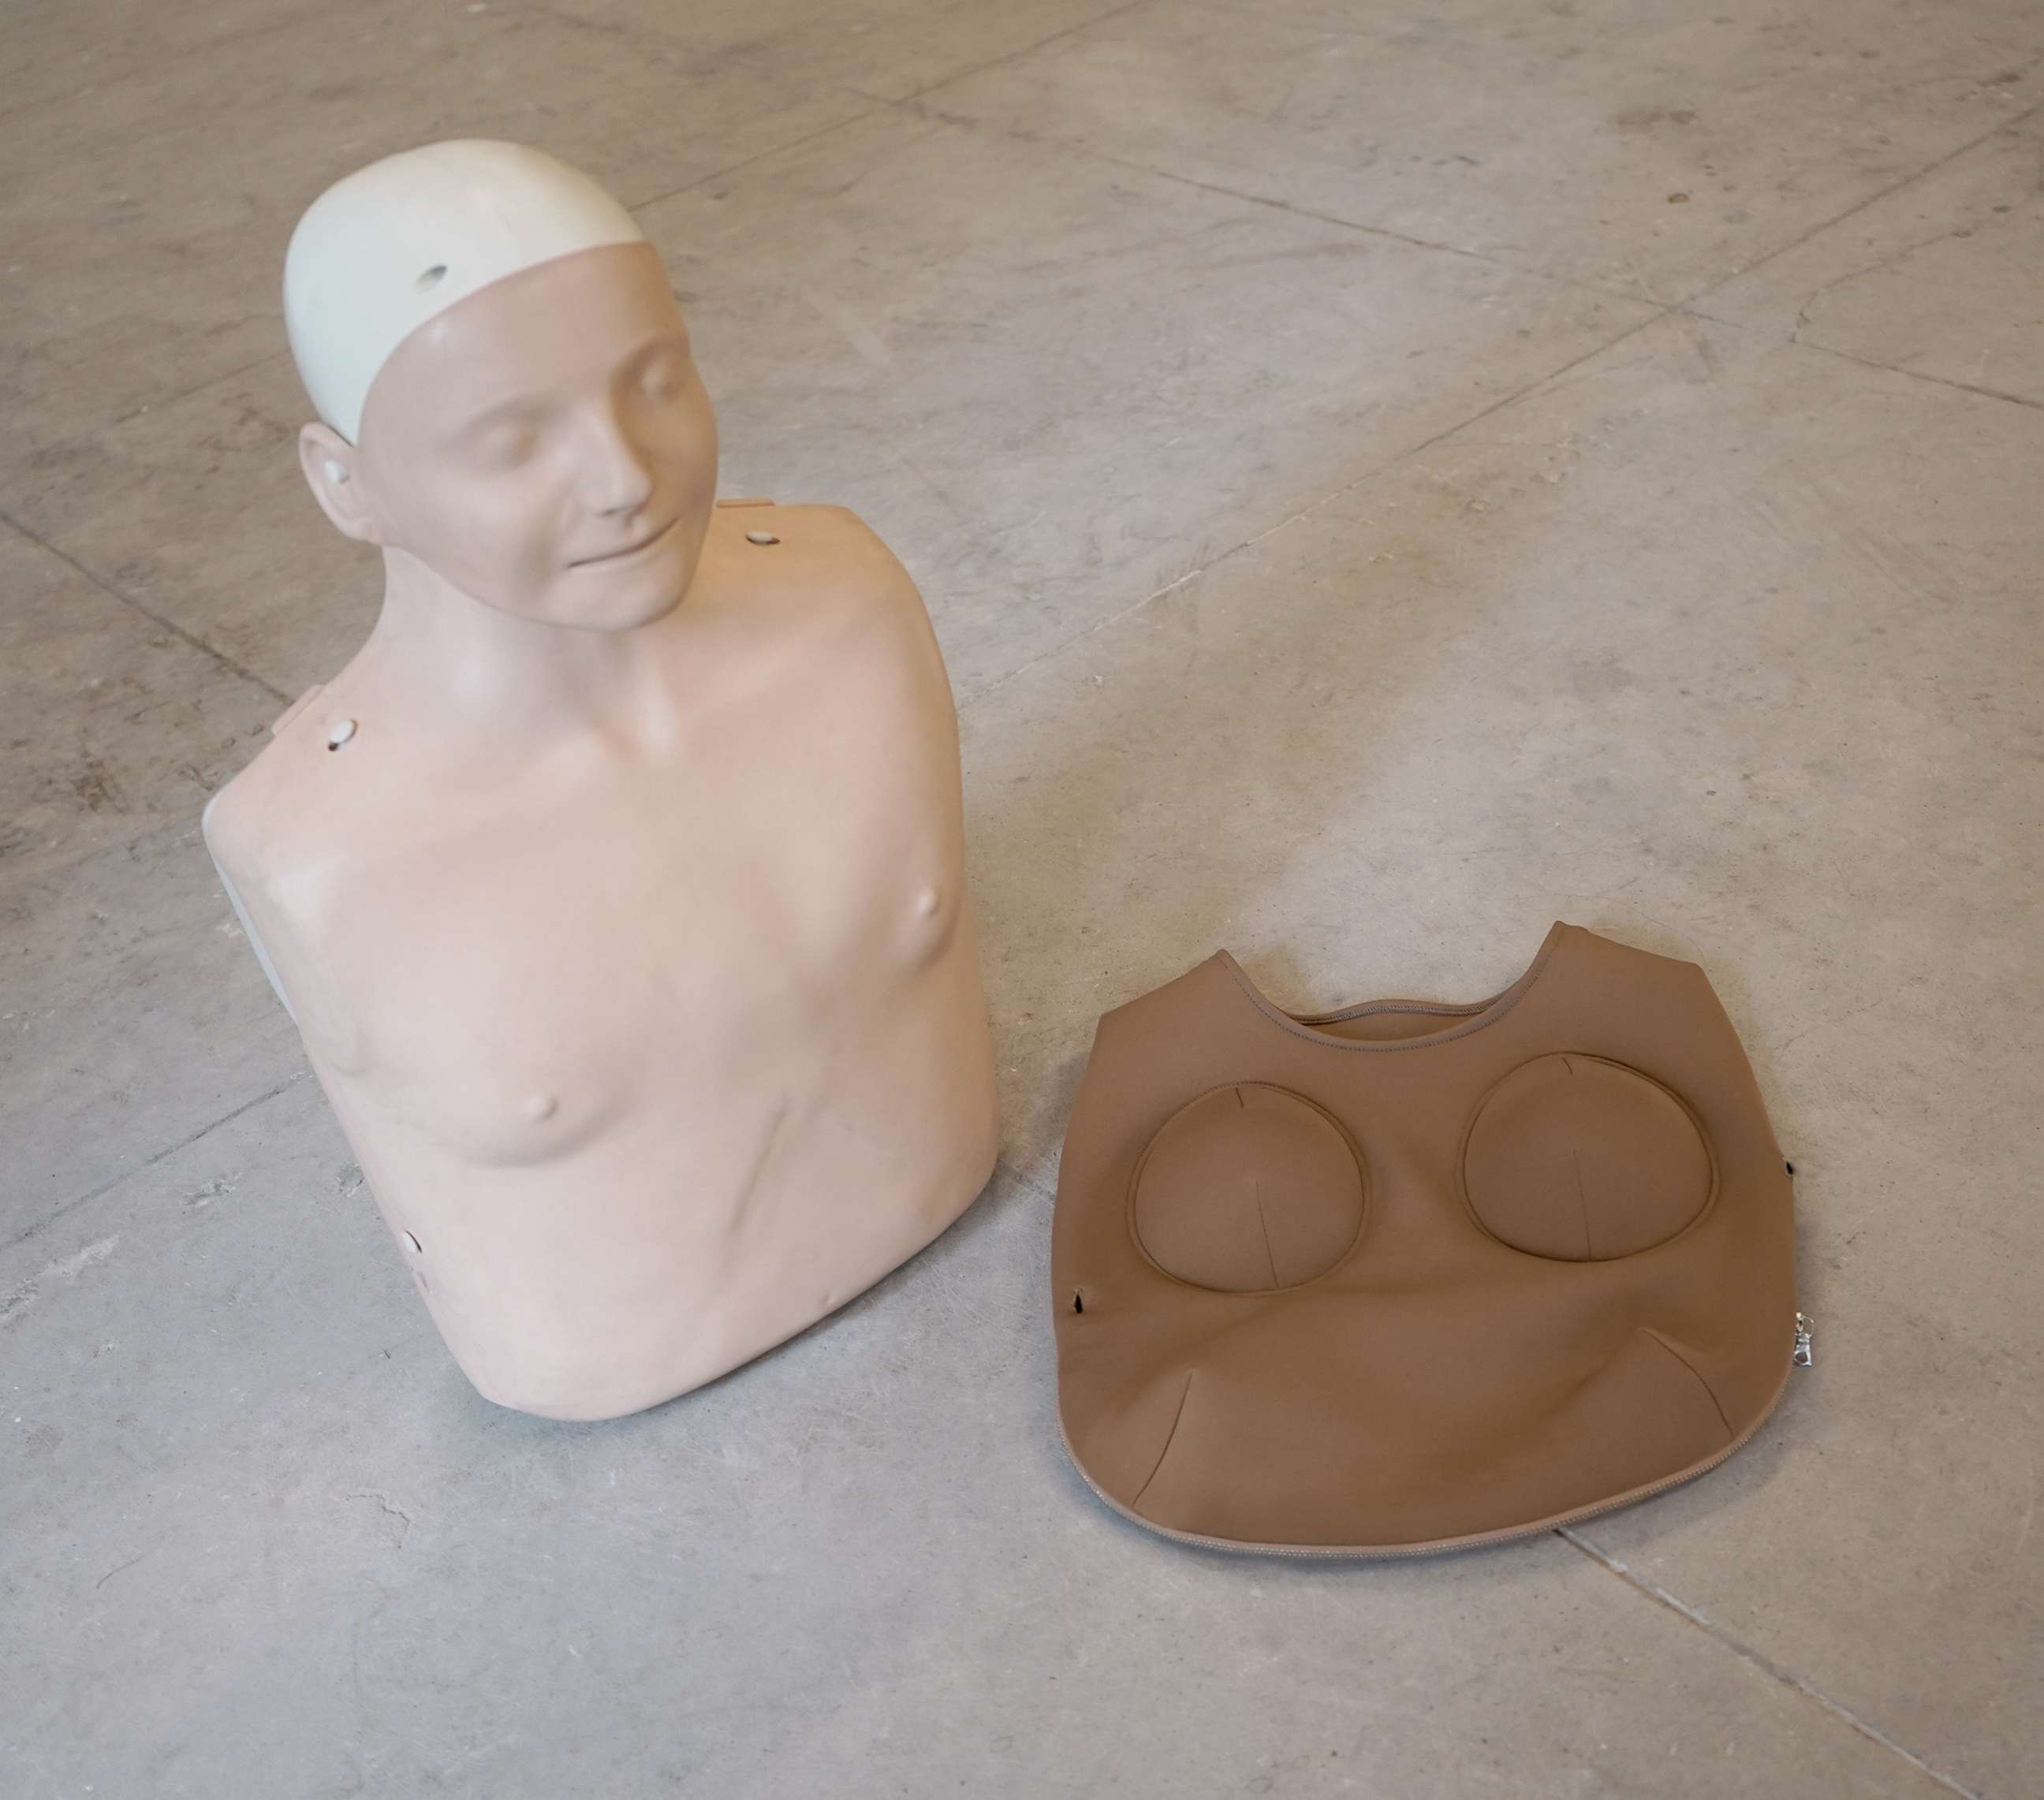 PHOTO: The Womanikin is an attachment for flat-chested CPR dummies.